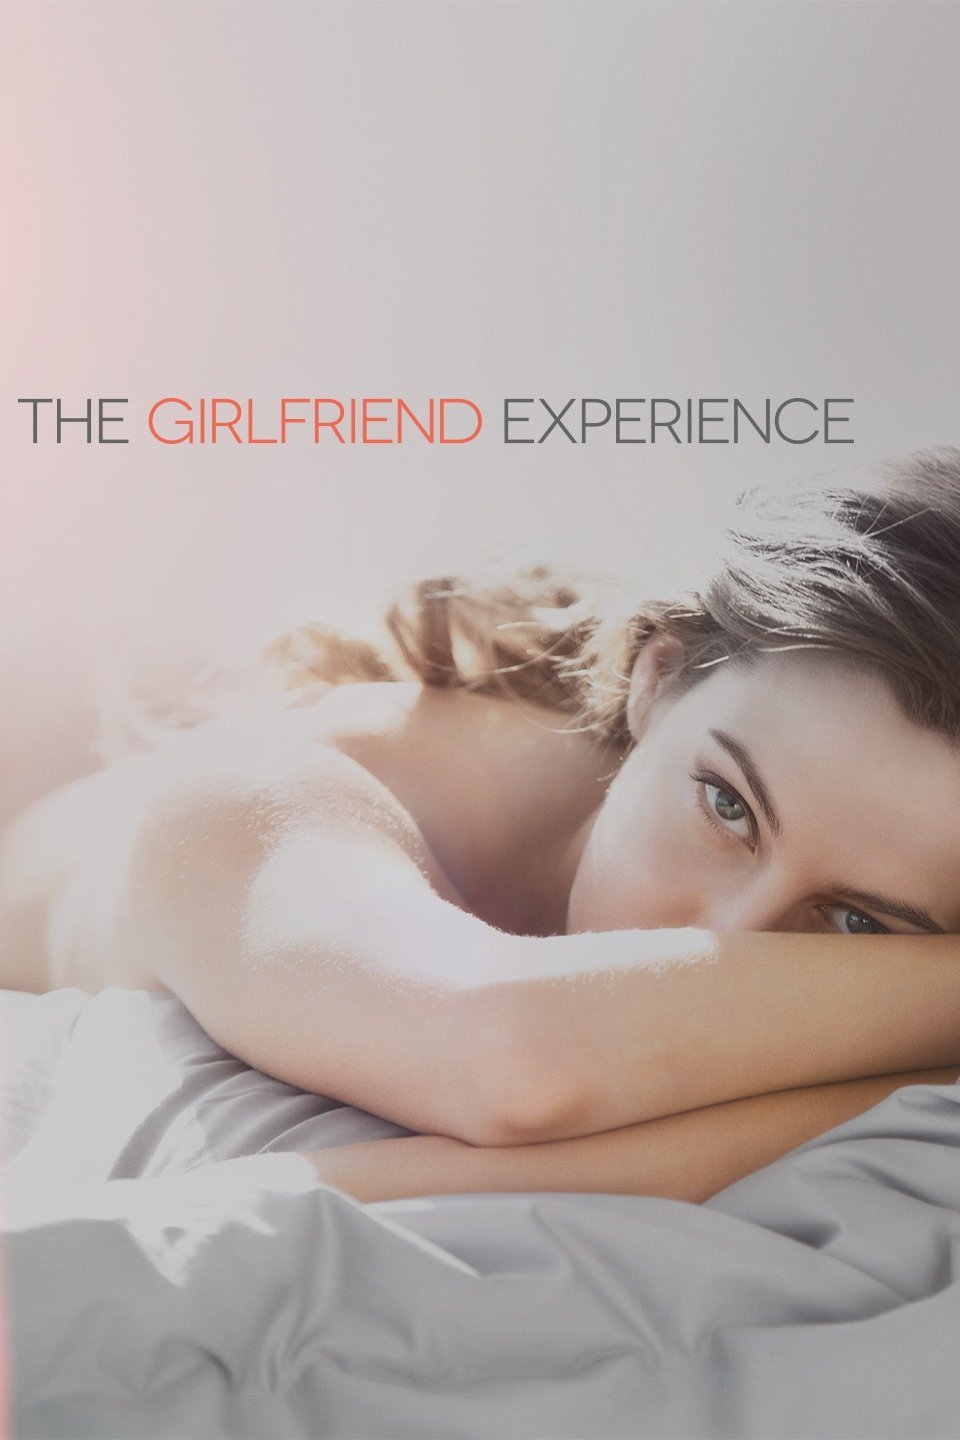 mom helps with the girlfriend experience Sex Images Hq